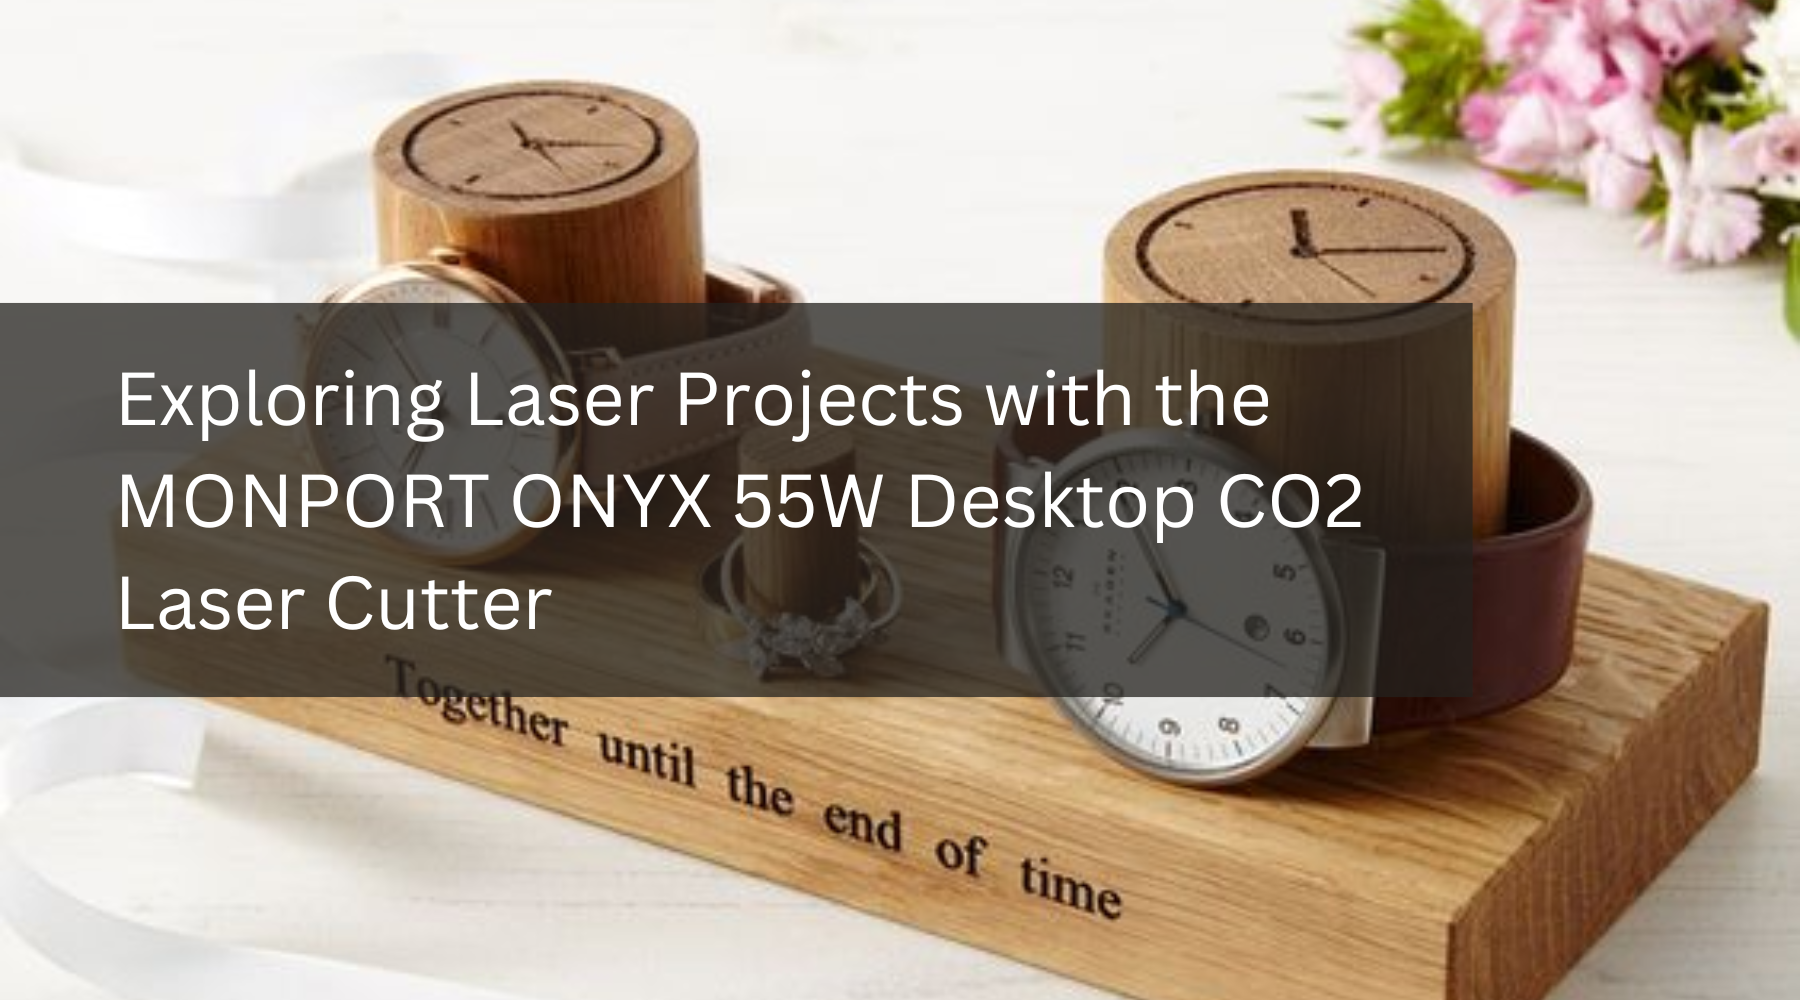 Exploring Laser Projects with the MONPORT ONYX 55W Desktop CO2 Laser Cutter